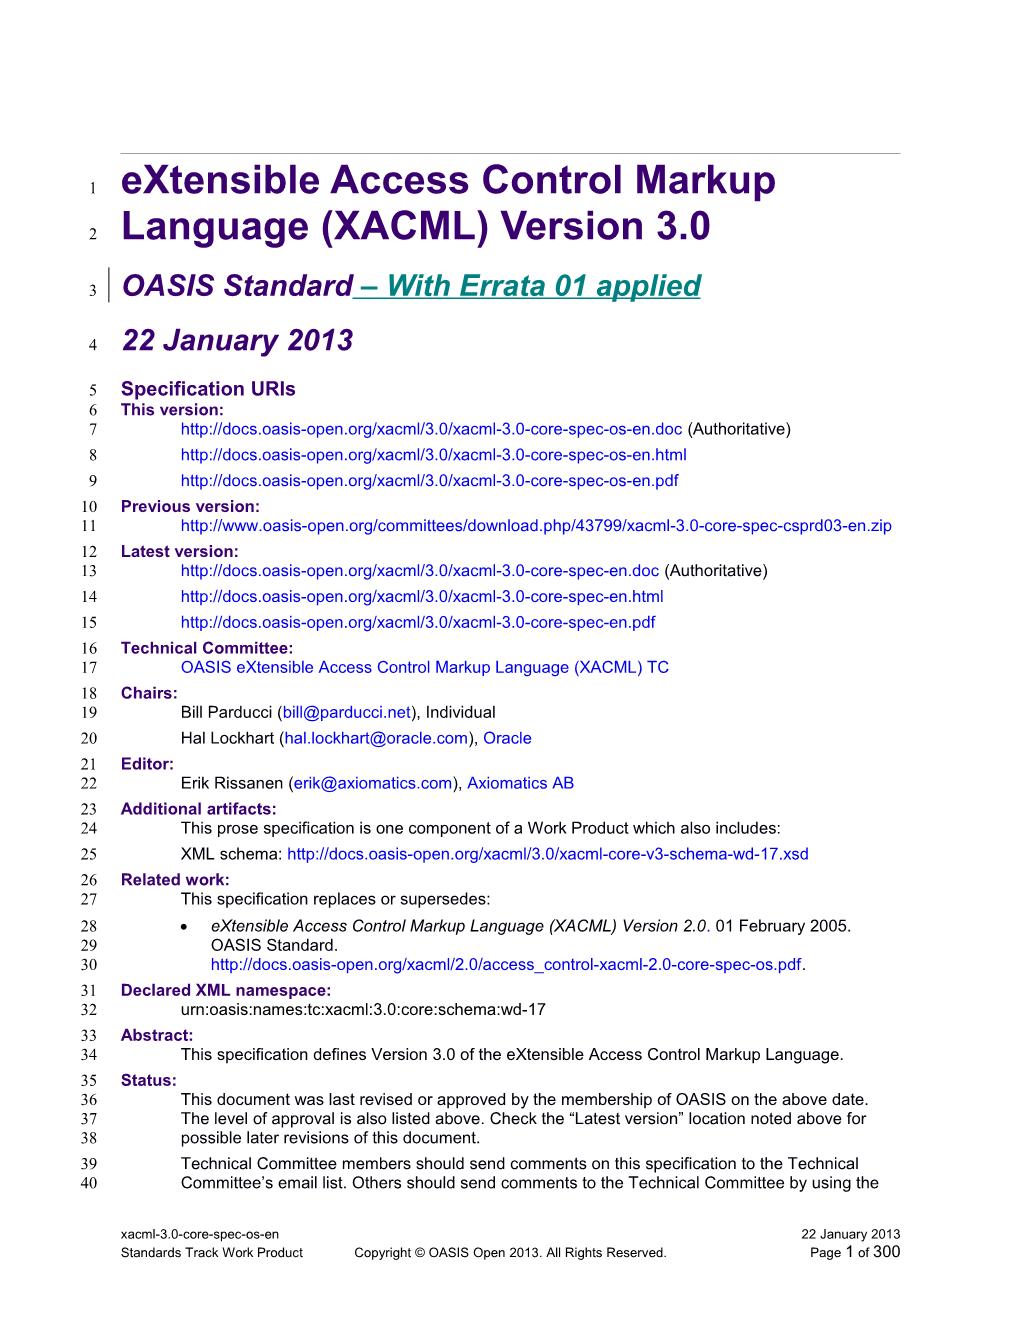 Extensible Access Control Markup Language (XACML) Version 3.0